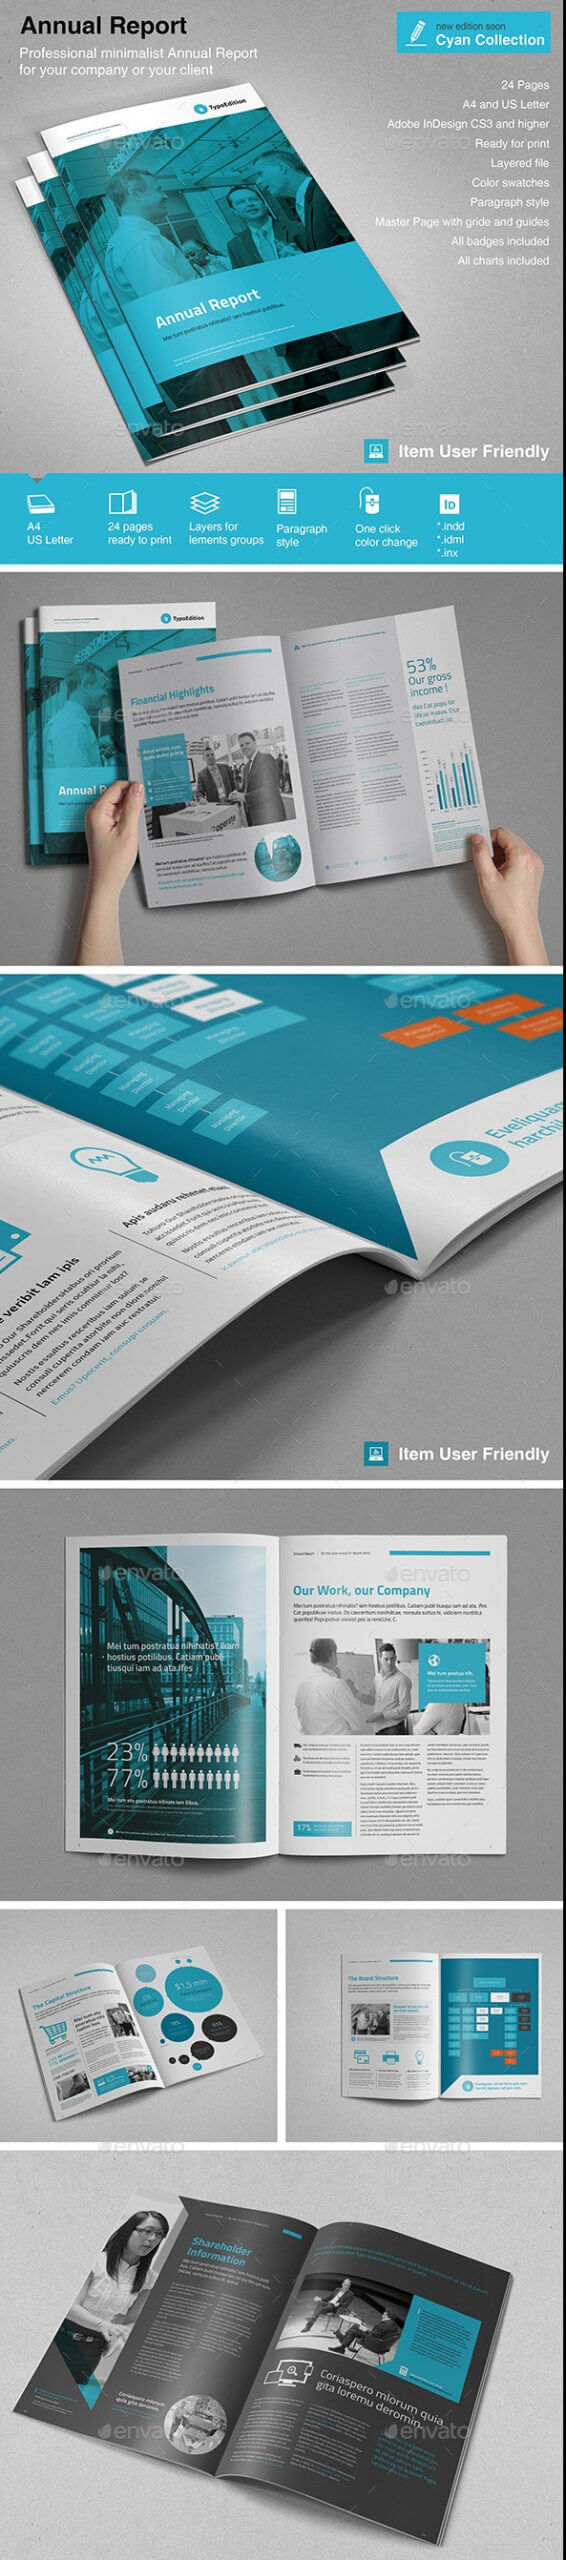 32+ Indesign Annual Report Templates For Corporate For Free Annual Report Template Indesign